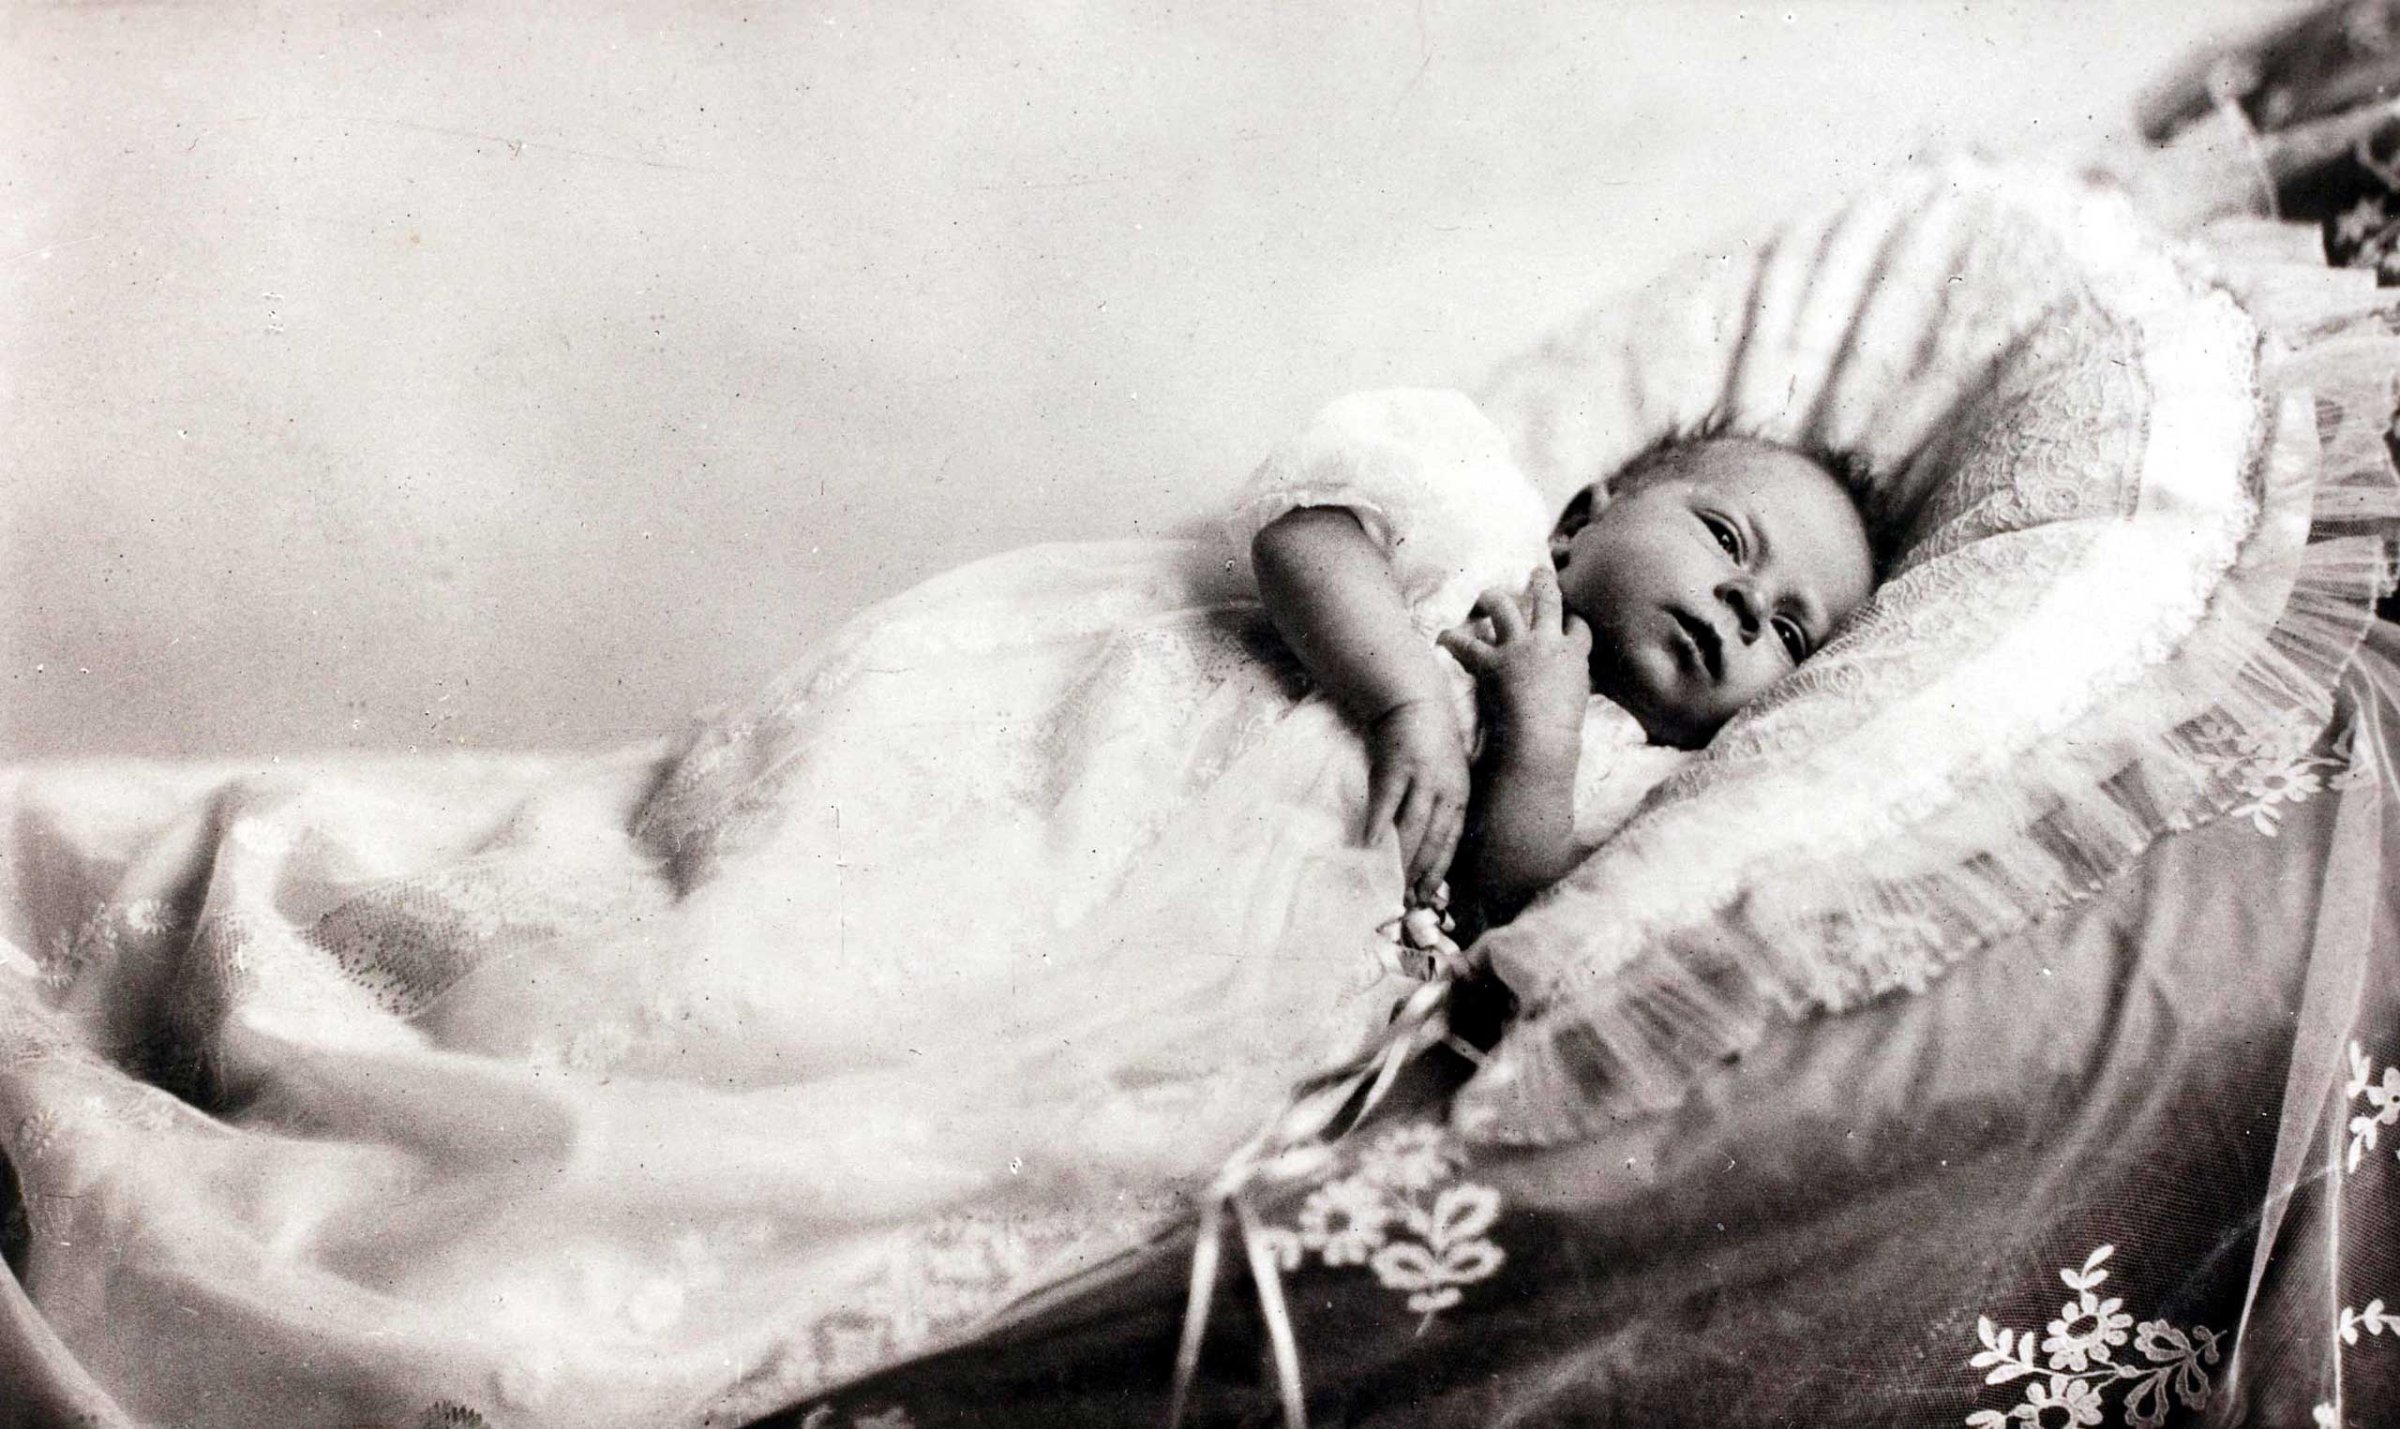 In 1926, as a tiny baby, Princess Elizabeth already displays the solemn face that she has deployed so often in her public duties since becoming Queen.